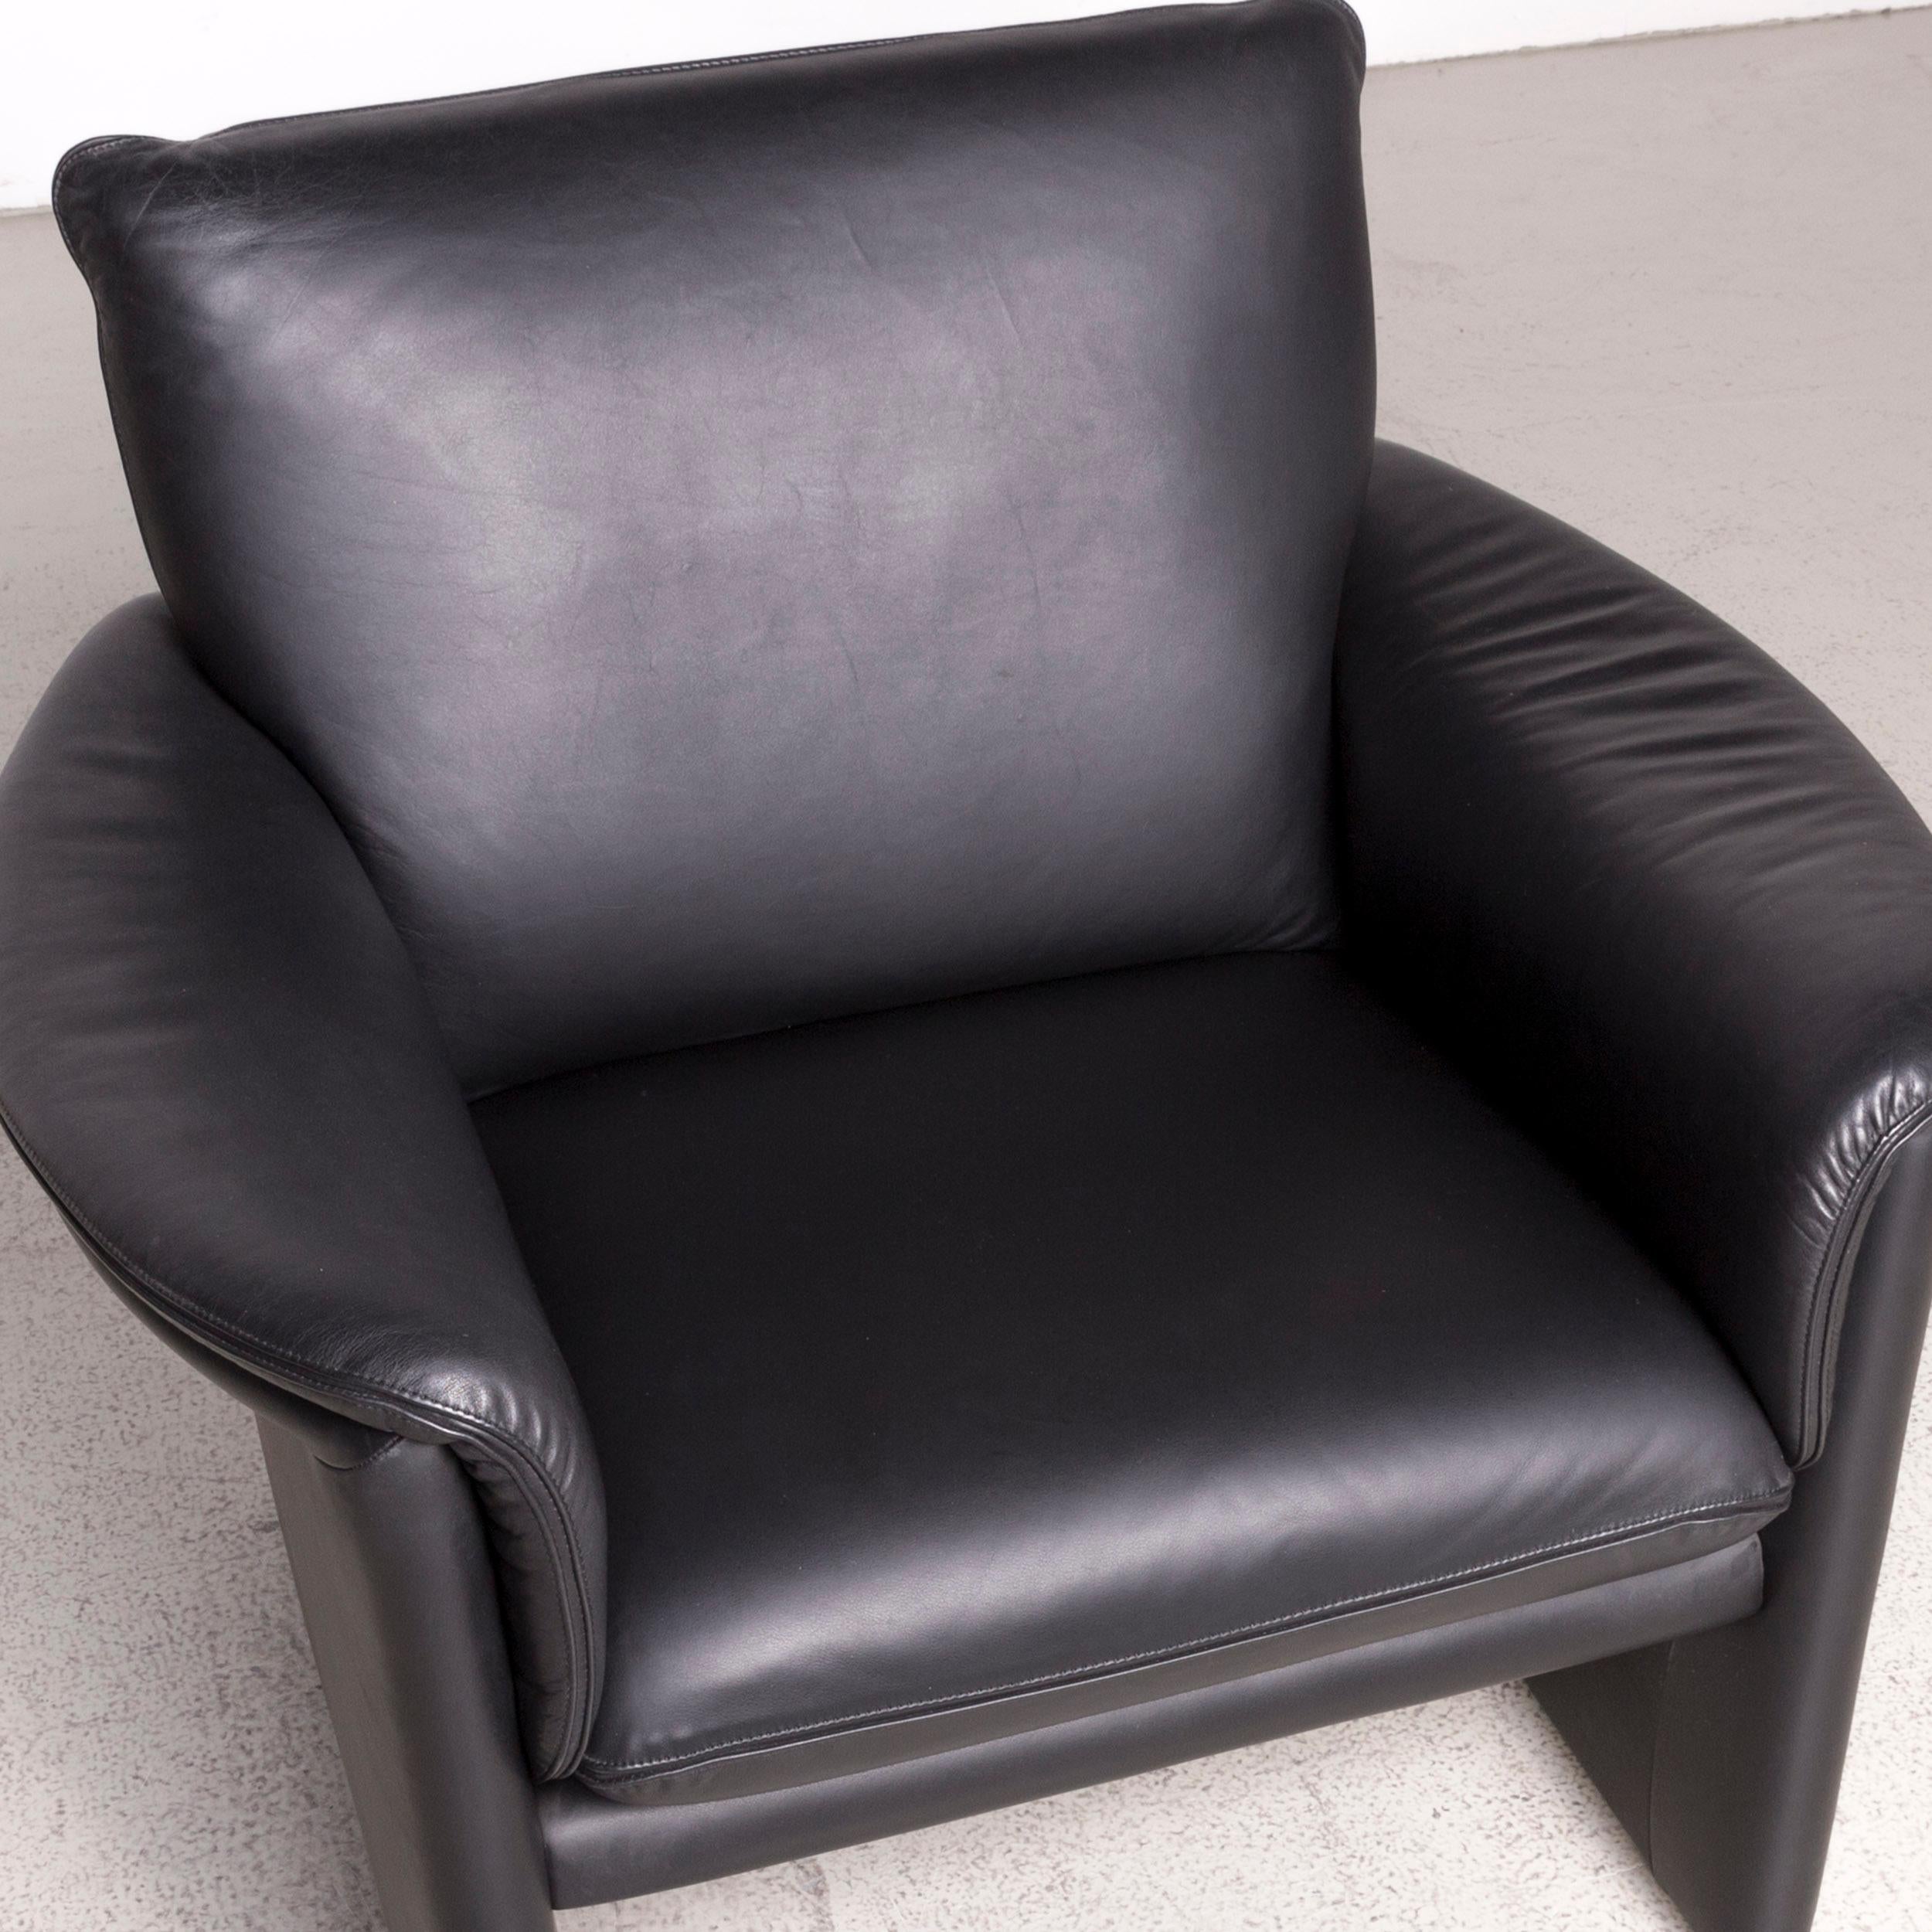 COR Zento Designer Leather Armchair Black Genuine Leather Chair In Excellent Condition For Sale In Cologne, DE